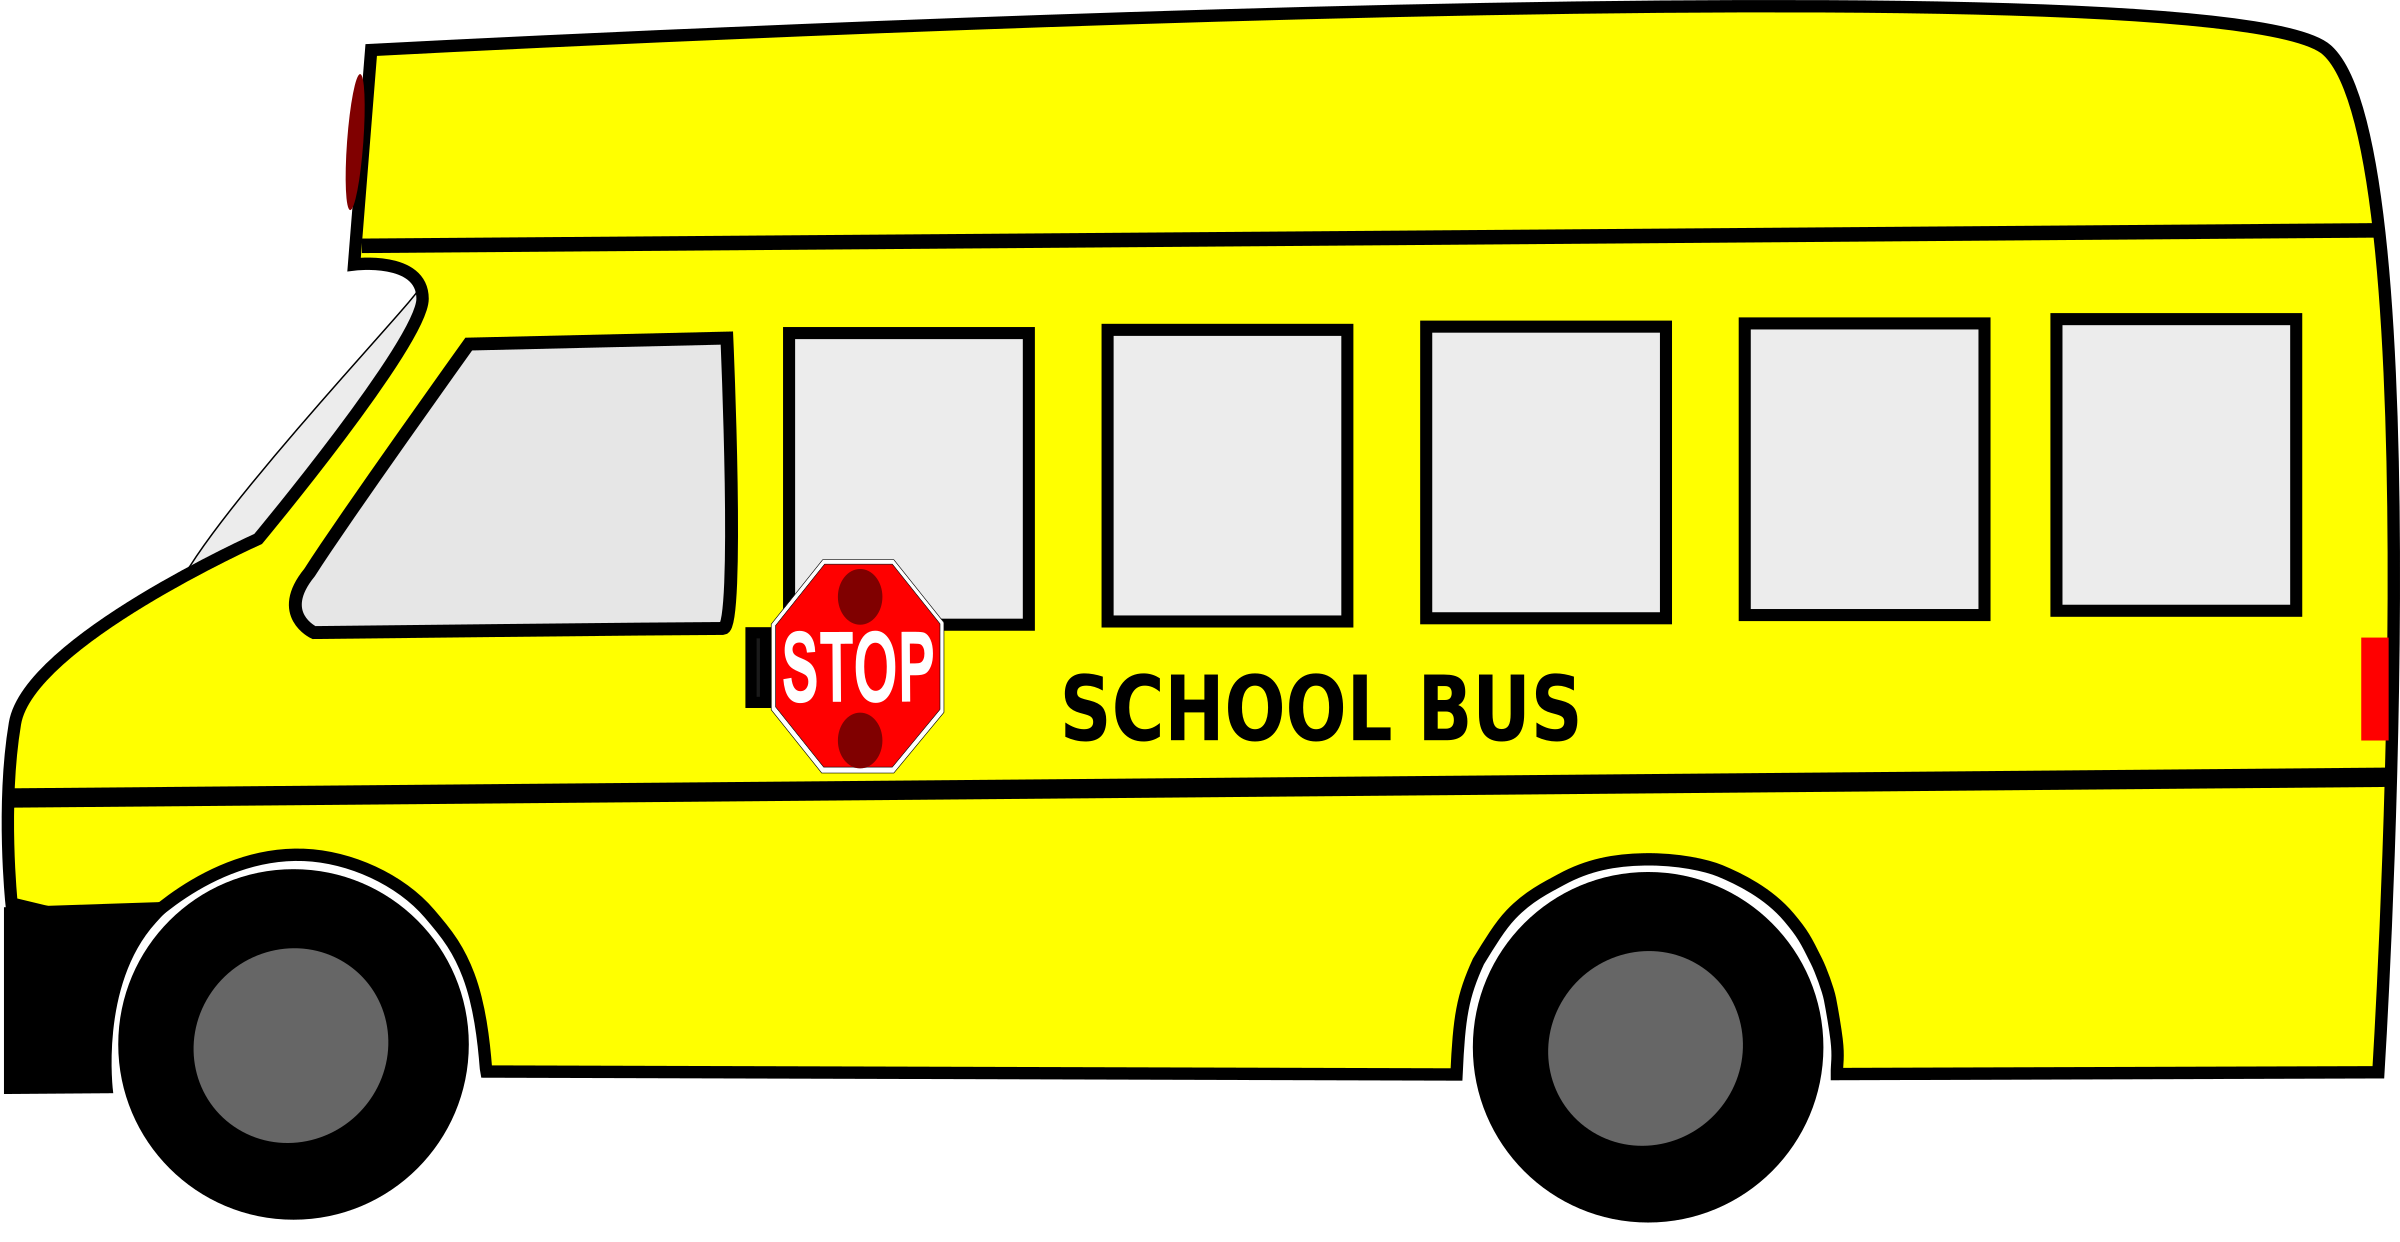 Bus animated svg free. Moving clipart school